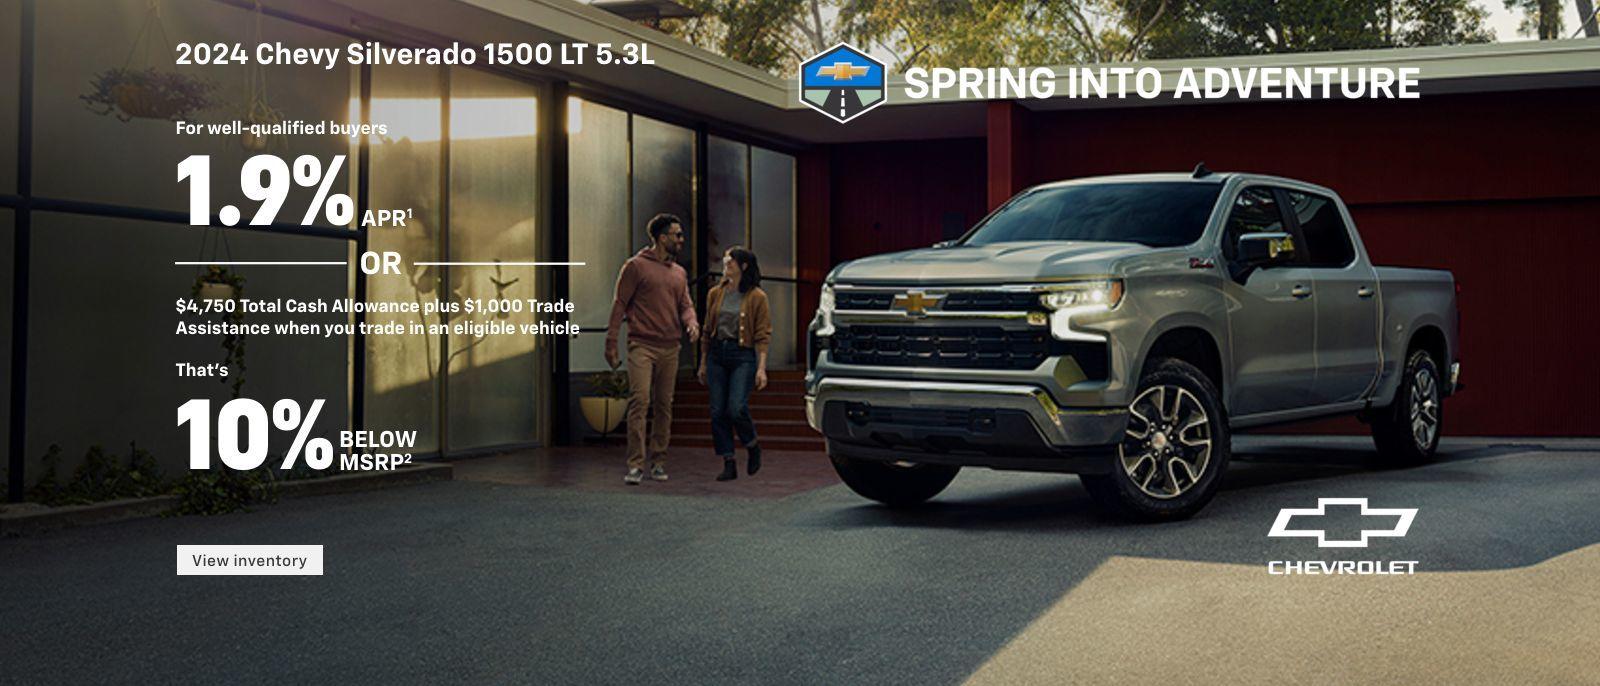 2024 Chevy Silverado 1500 LT 5.3L. For well-qualified buyers 1.9% APR. Or, $4,750 Total Cash Allowance plus $1,000 Trade Assistance when you trade in an eligible vehicle. That's, 10% below MSRP.